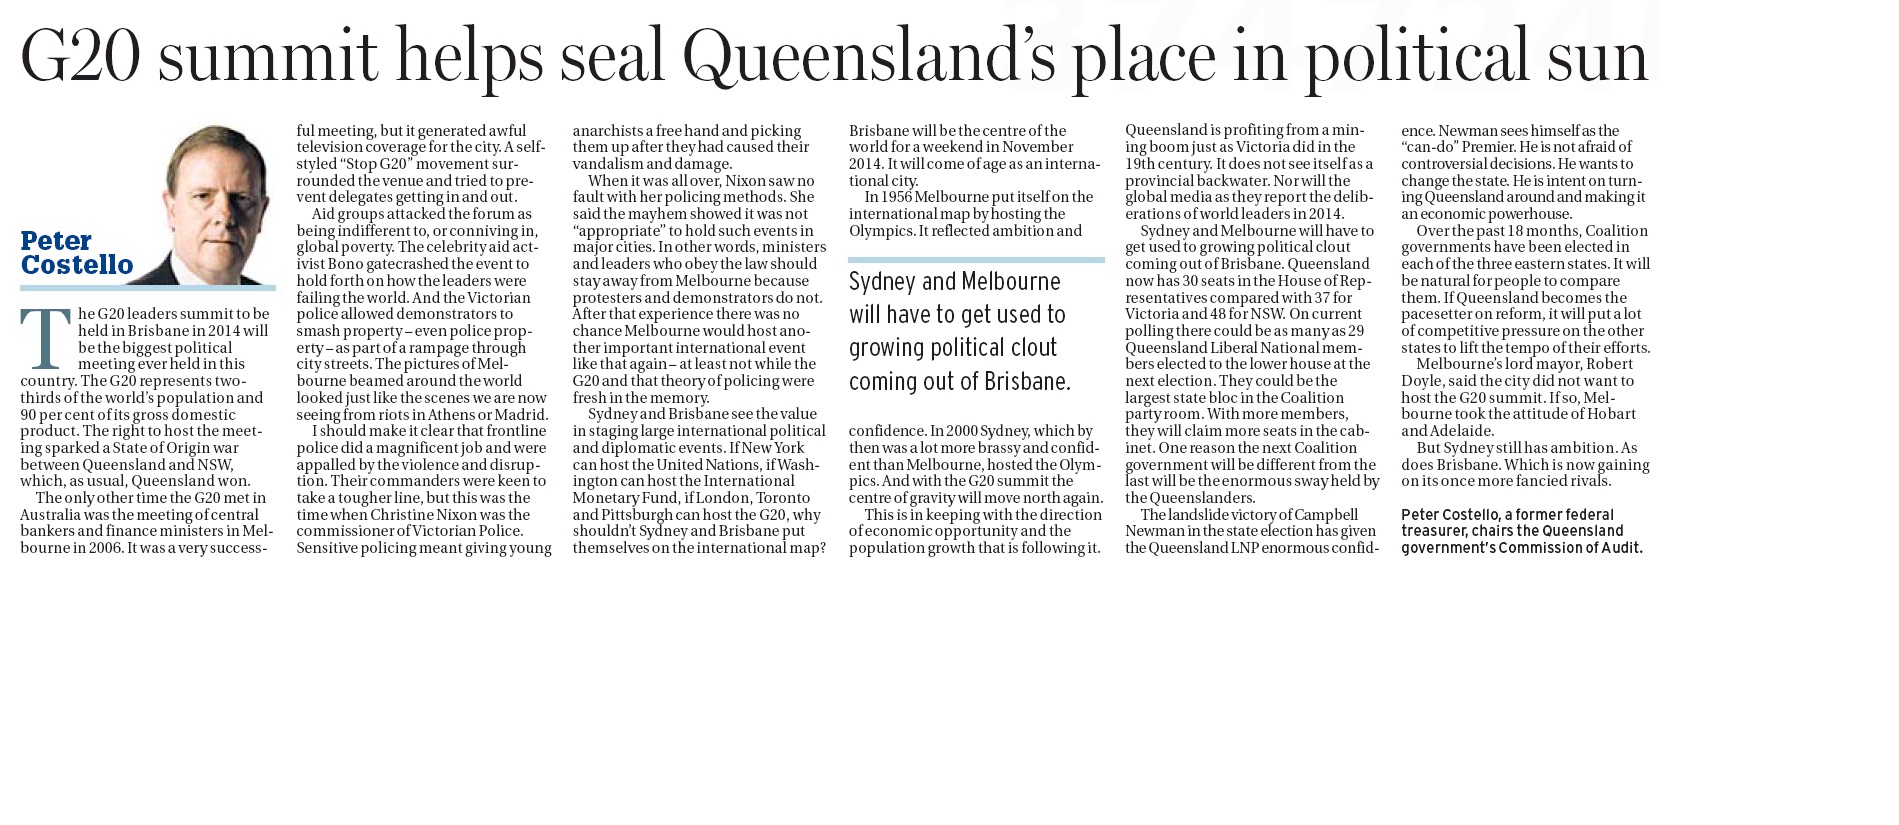 smh_-_g20_summit_helps_seal_queenslands_place_in_political_sun_-_18_july_2012jpg